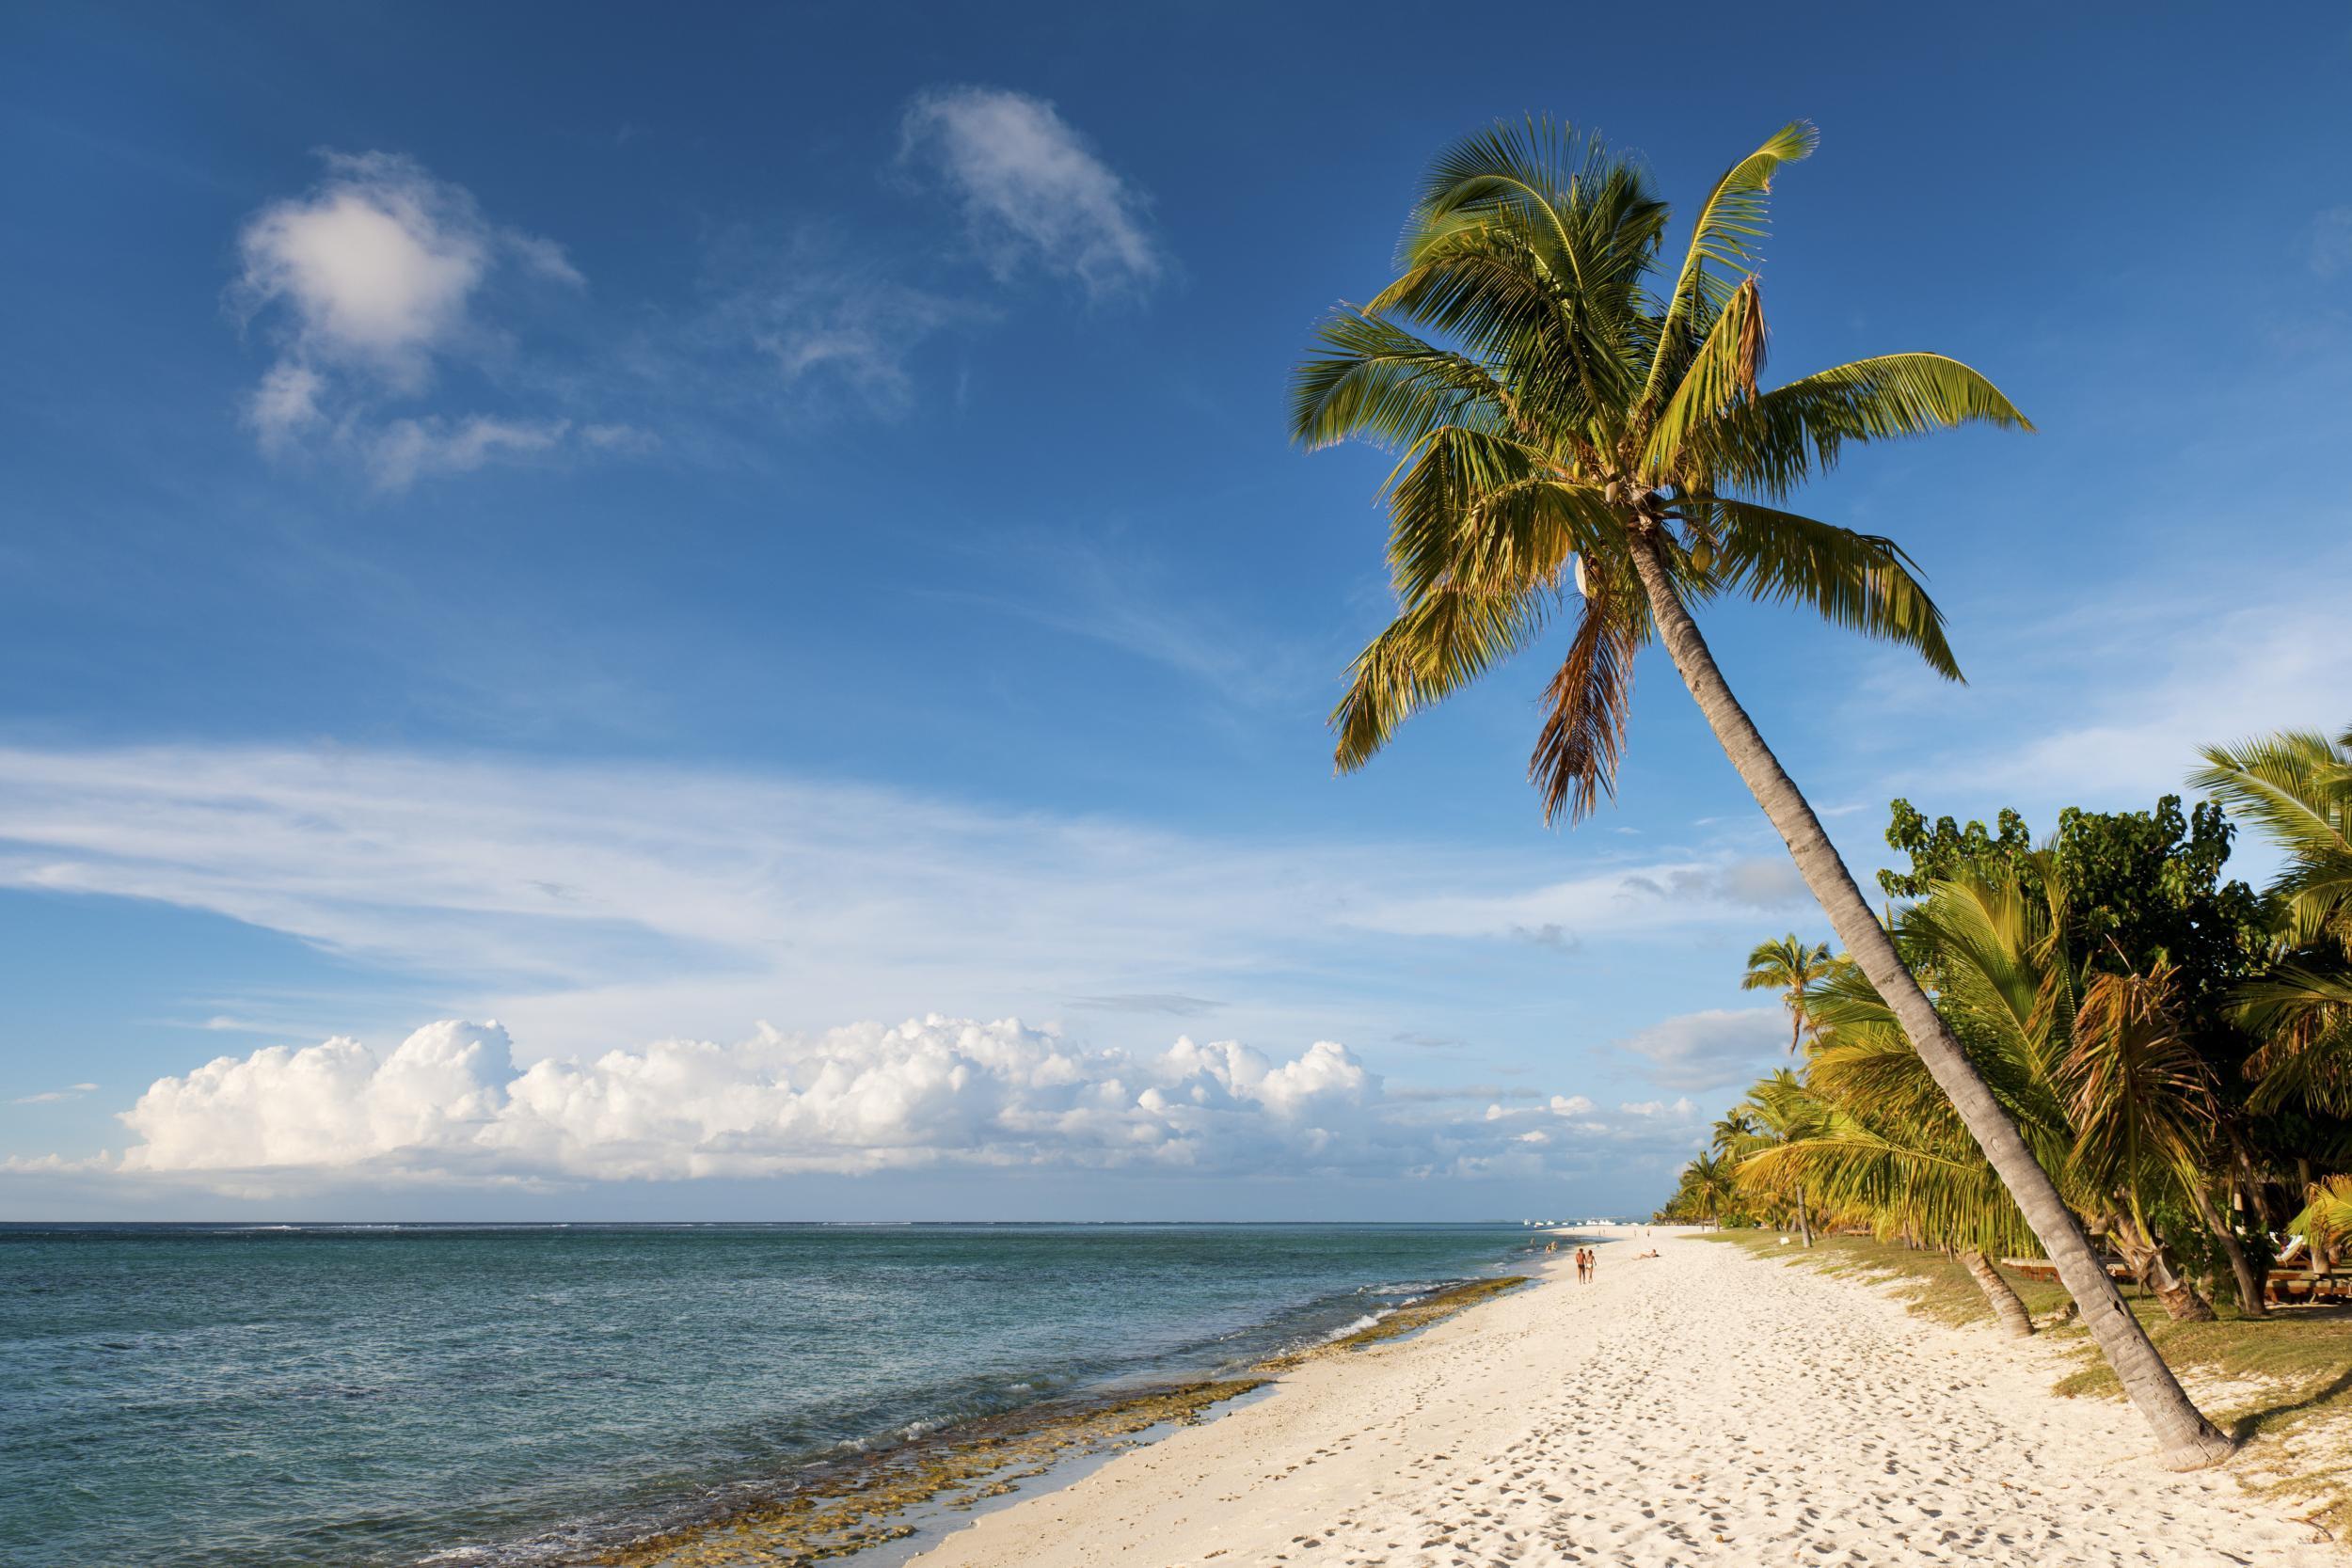 Take time out on beaches fringed with coconut palms